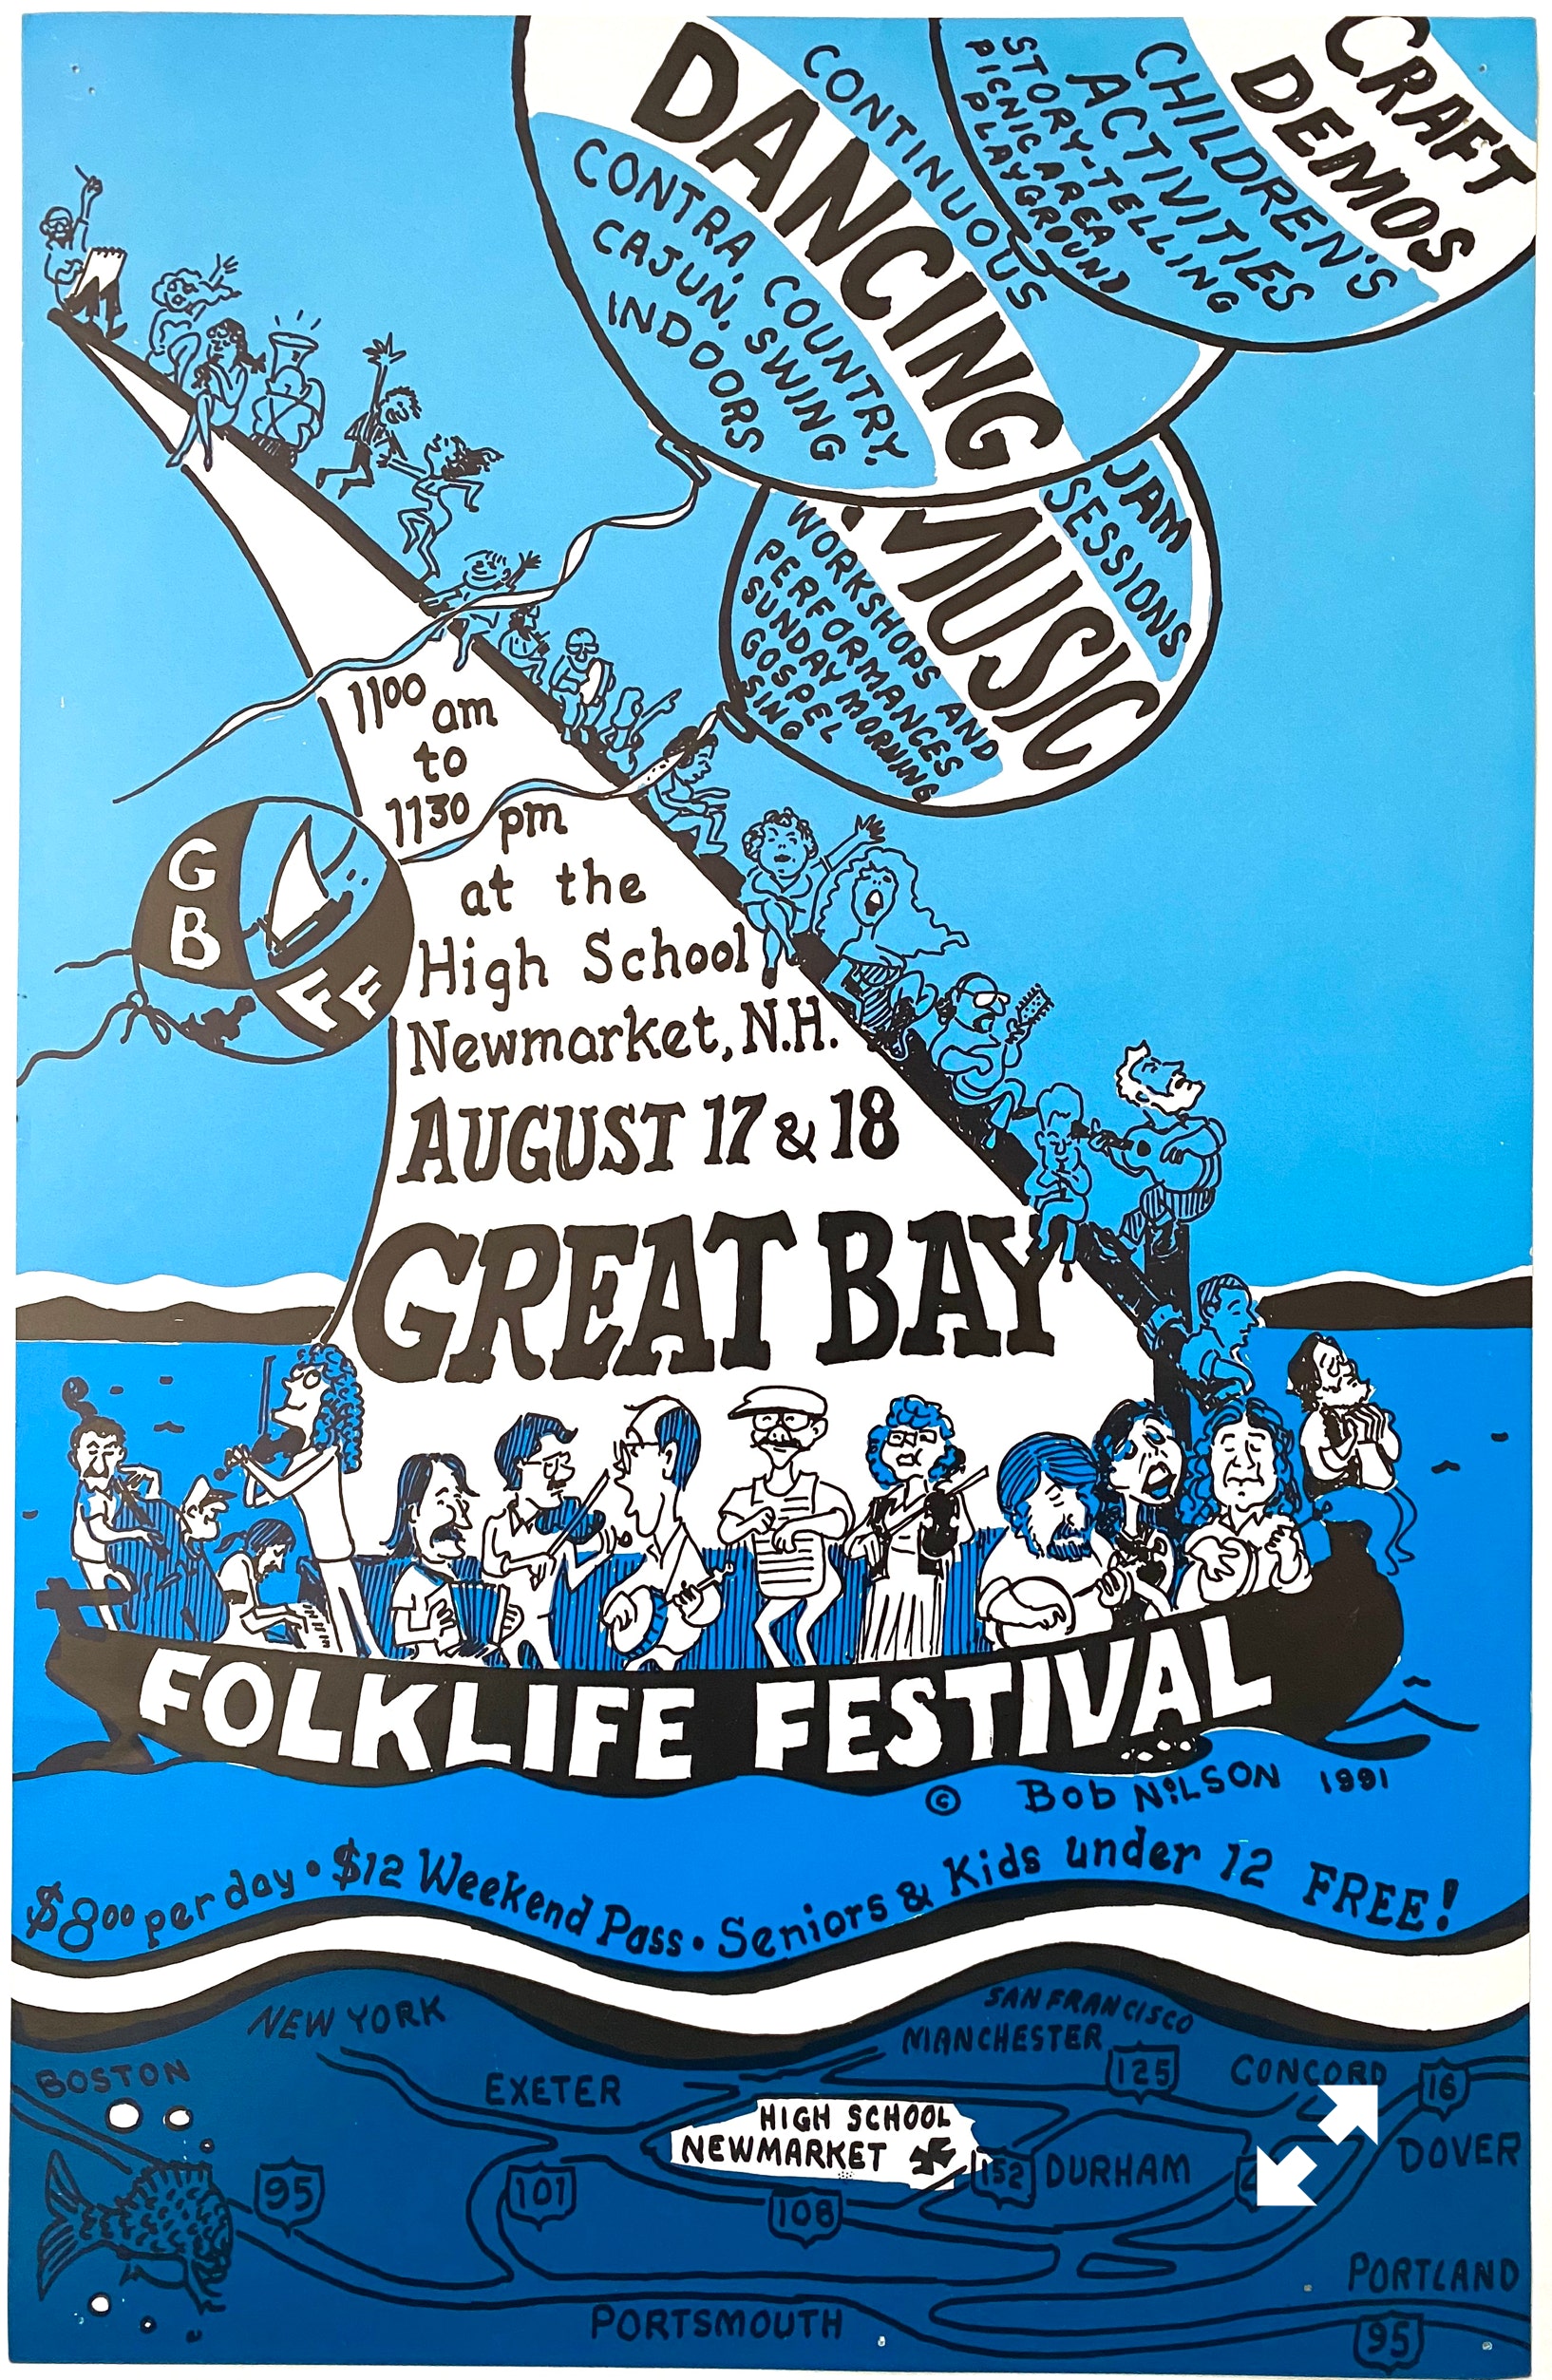 Poster for Great Bay Folk Festival, 1991, Newmarket, New Hampshire